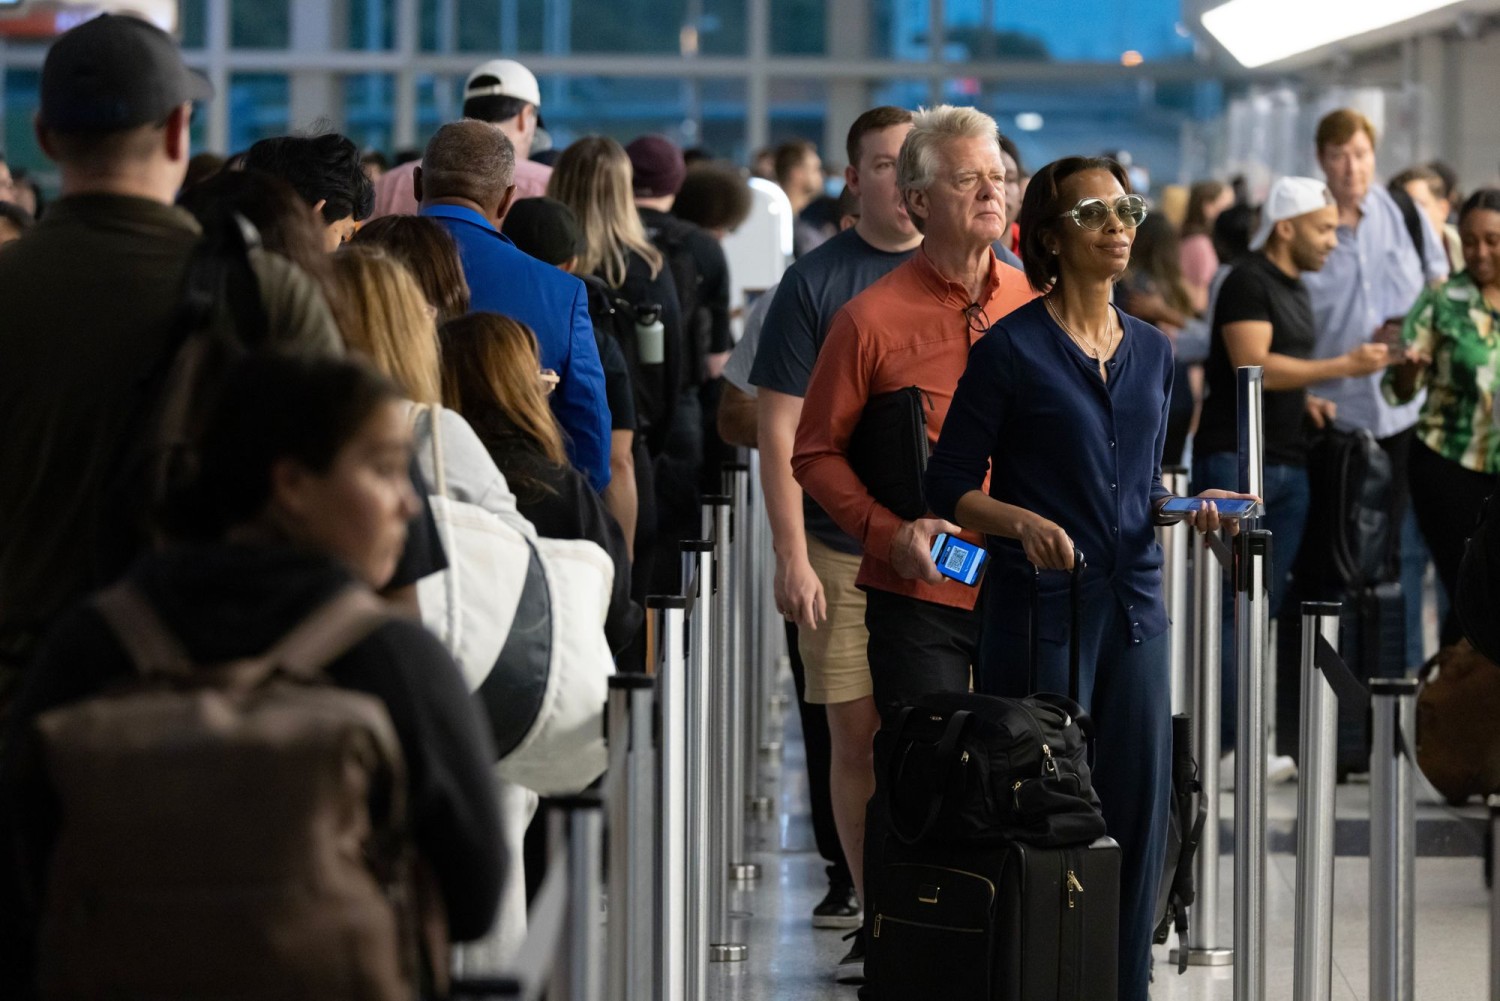 Record numbers of travelers are pouring into airports ahead of the Fourth of July holiday, which could translate into much longer lines. MICHAEL REYNOLDS/EPA/SHUTTERSTOCK